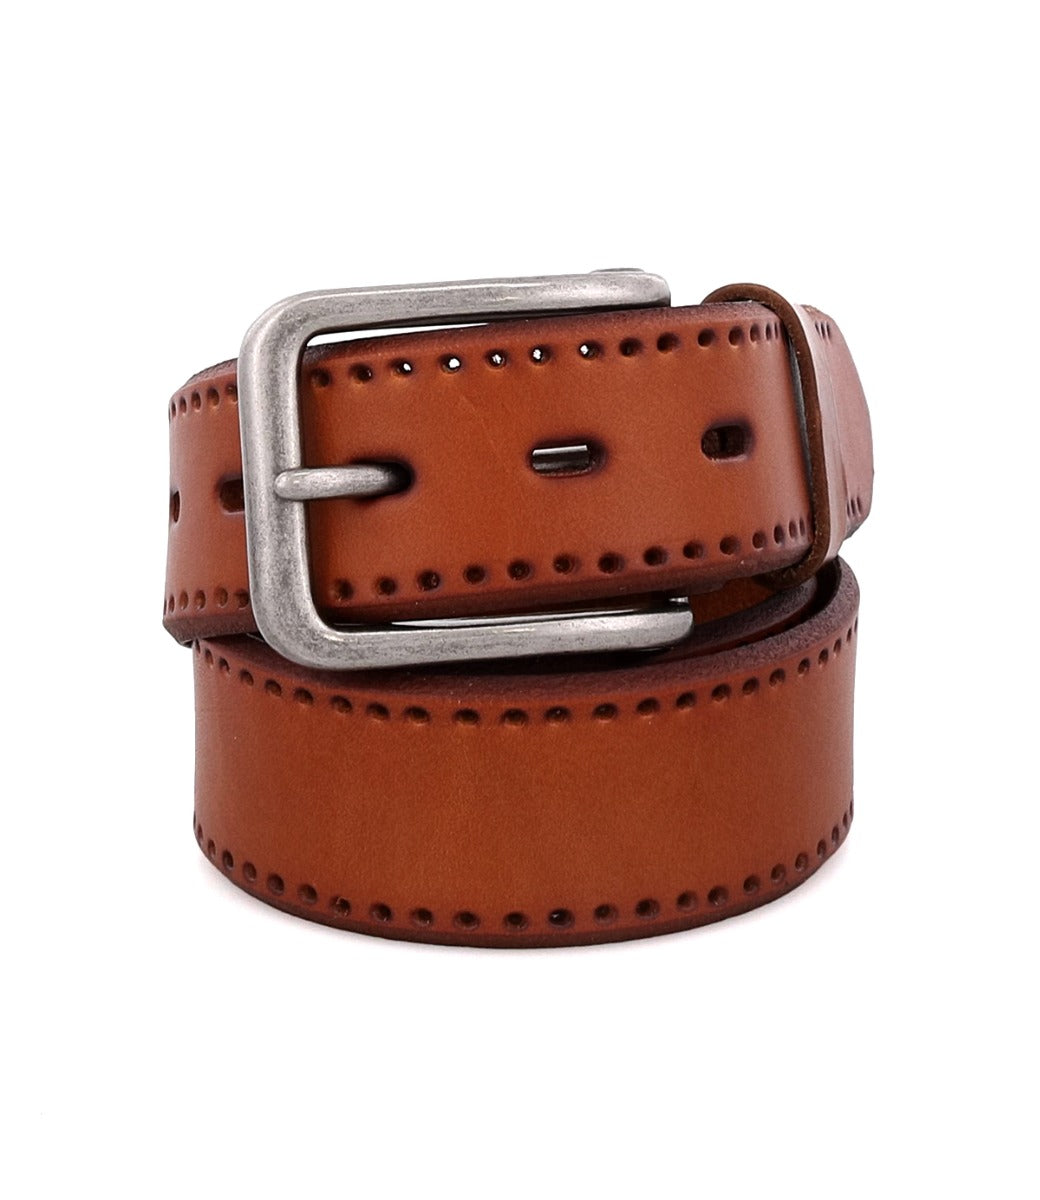 A Watford leather belt with a metal buckle by Bed Stu.